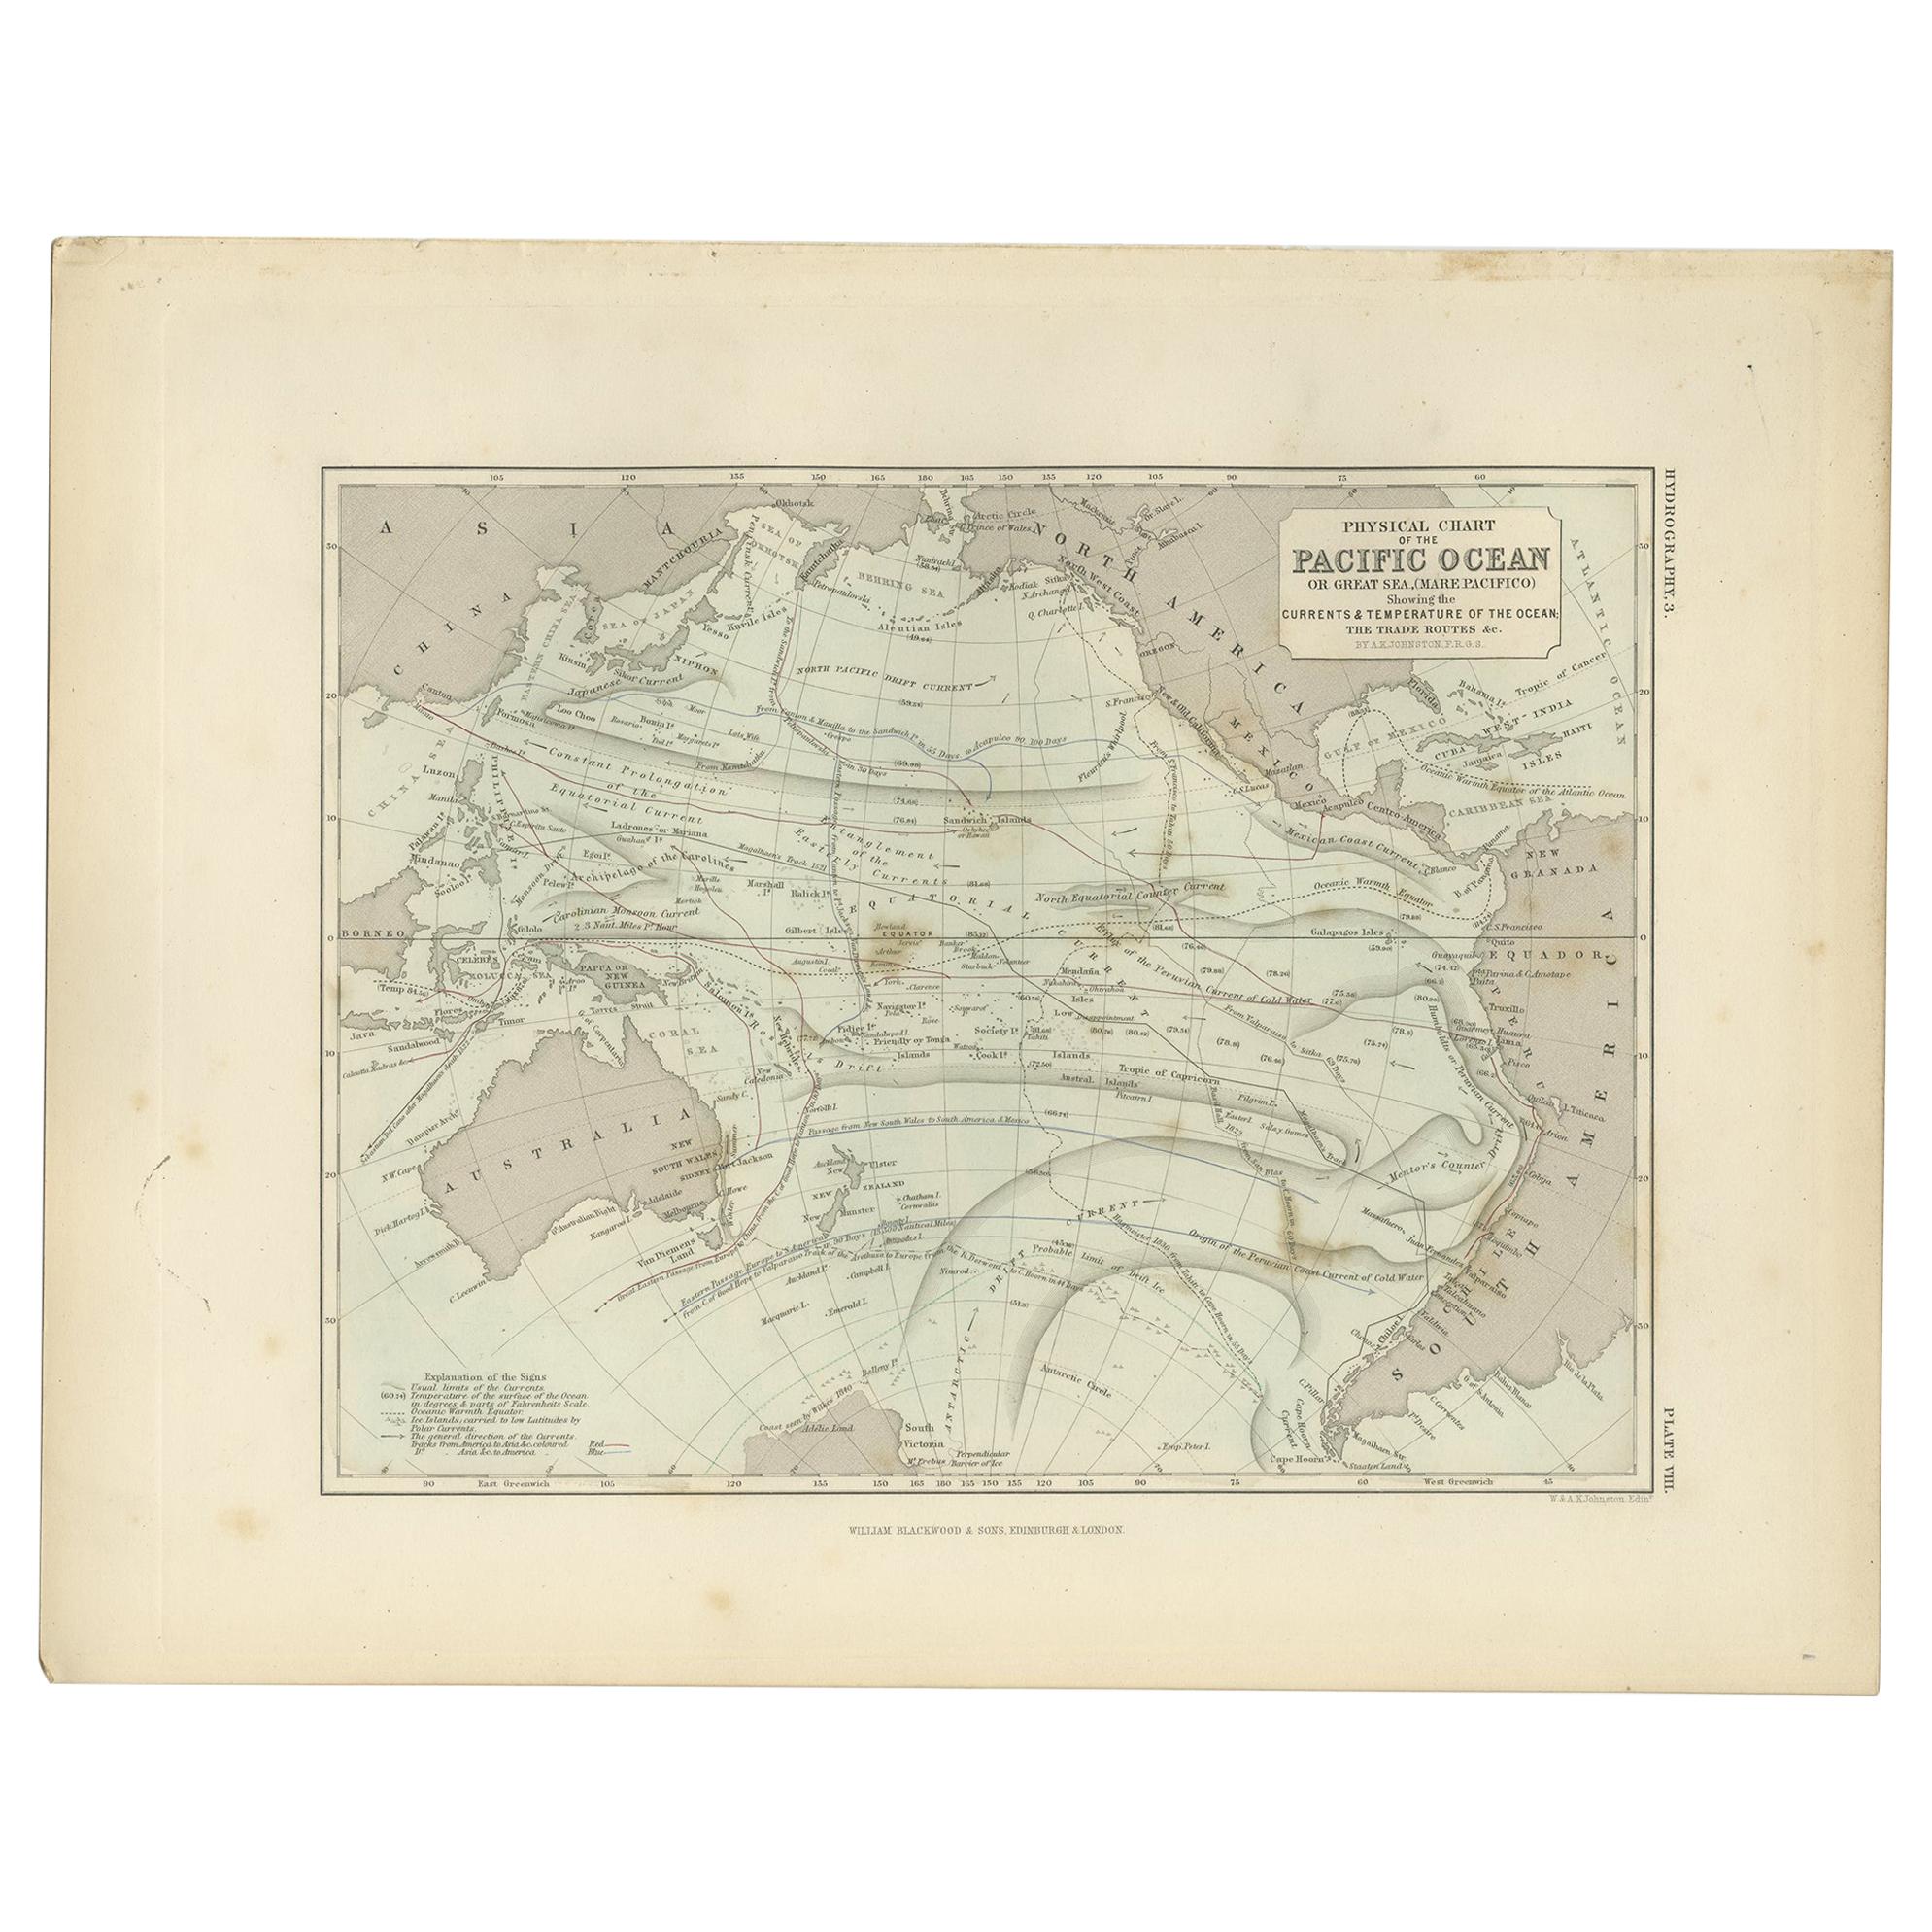 Antique Physical Chart of the Pacific Ocean by Johnston, '1850'